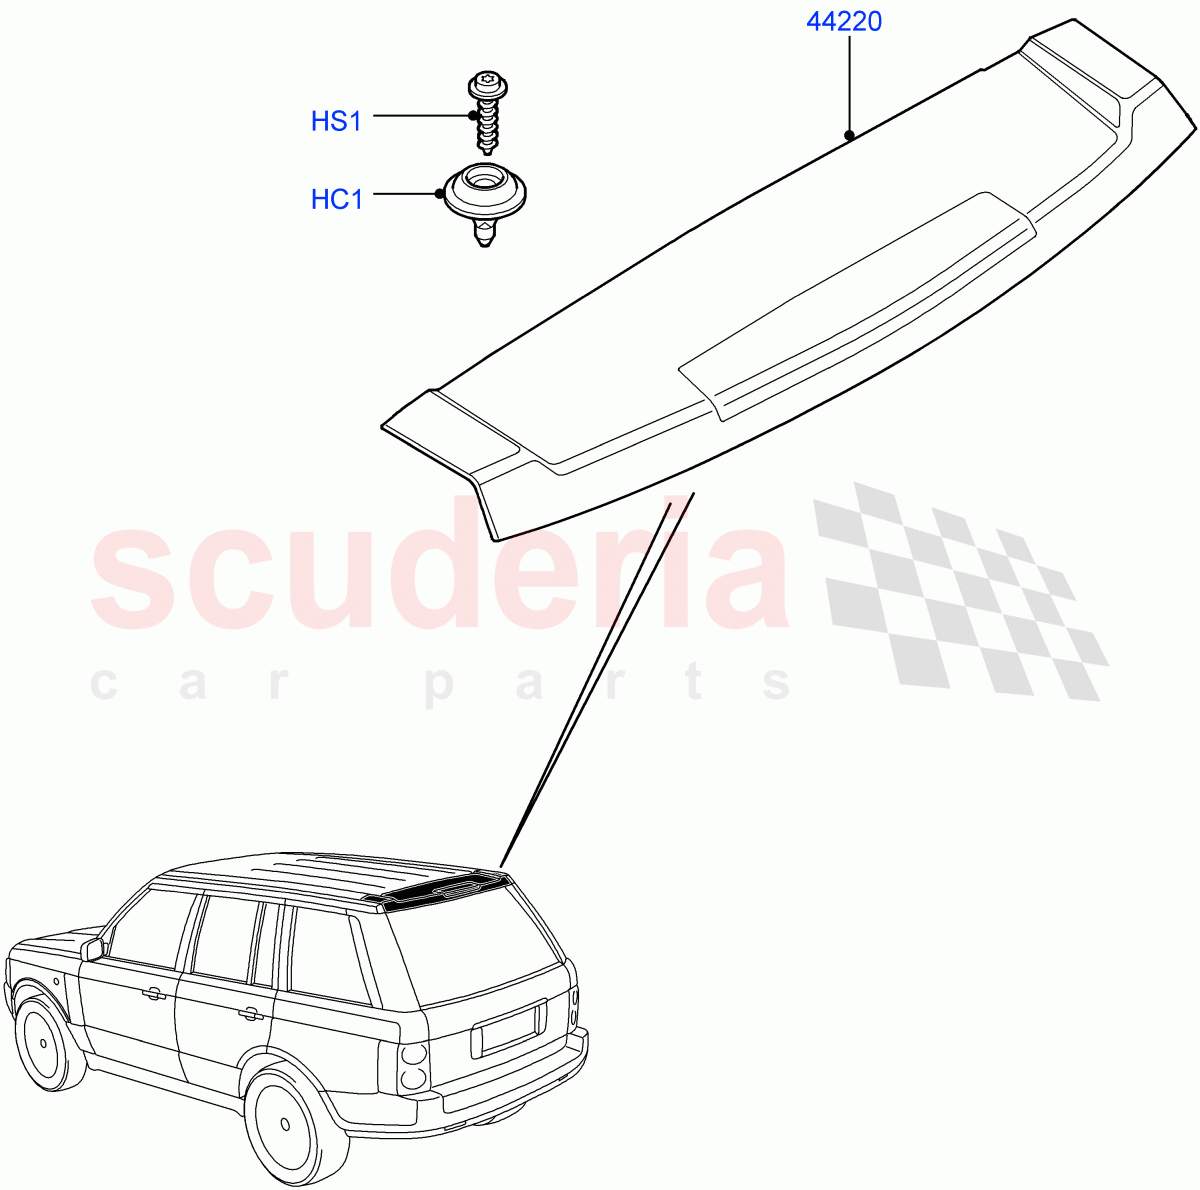 Spoiler And Related Parts((V)FROMAA000001) of Land Rover Land Rover Range Rover (2010-2012) [3.6 V8 32V DOHC EFI Diesel]